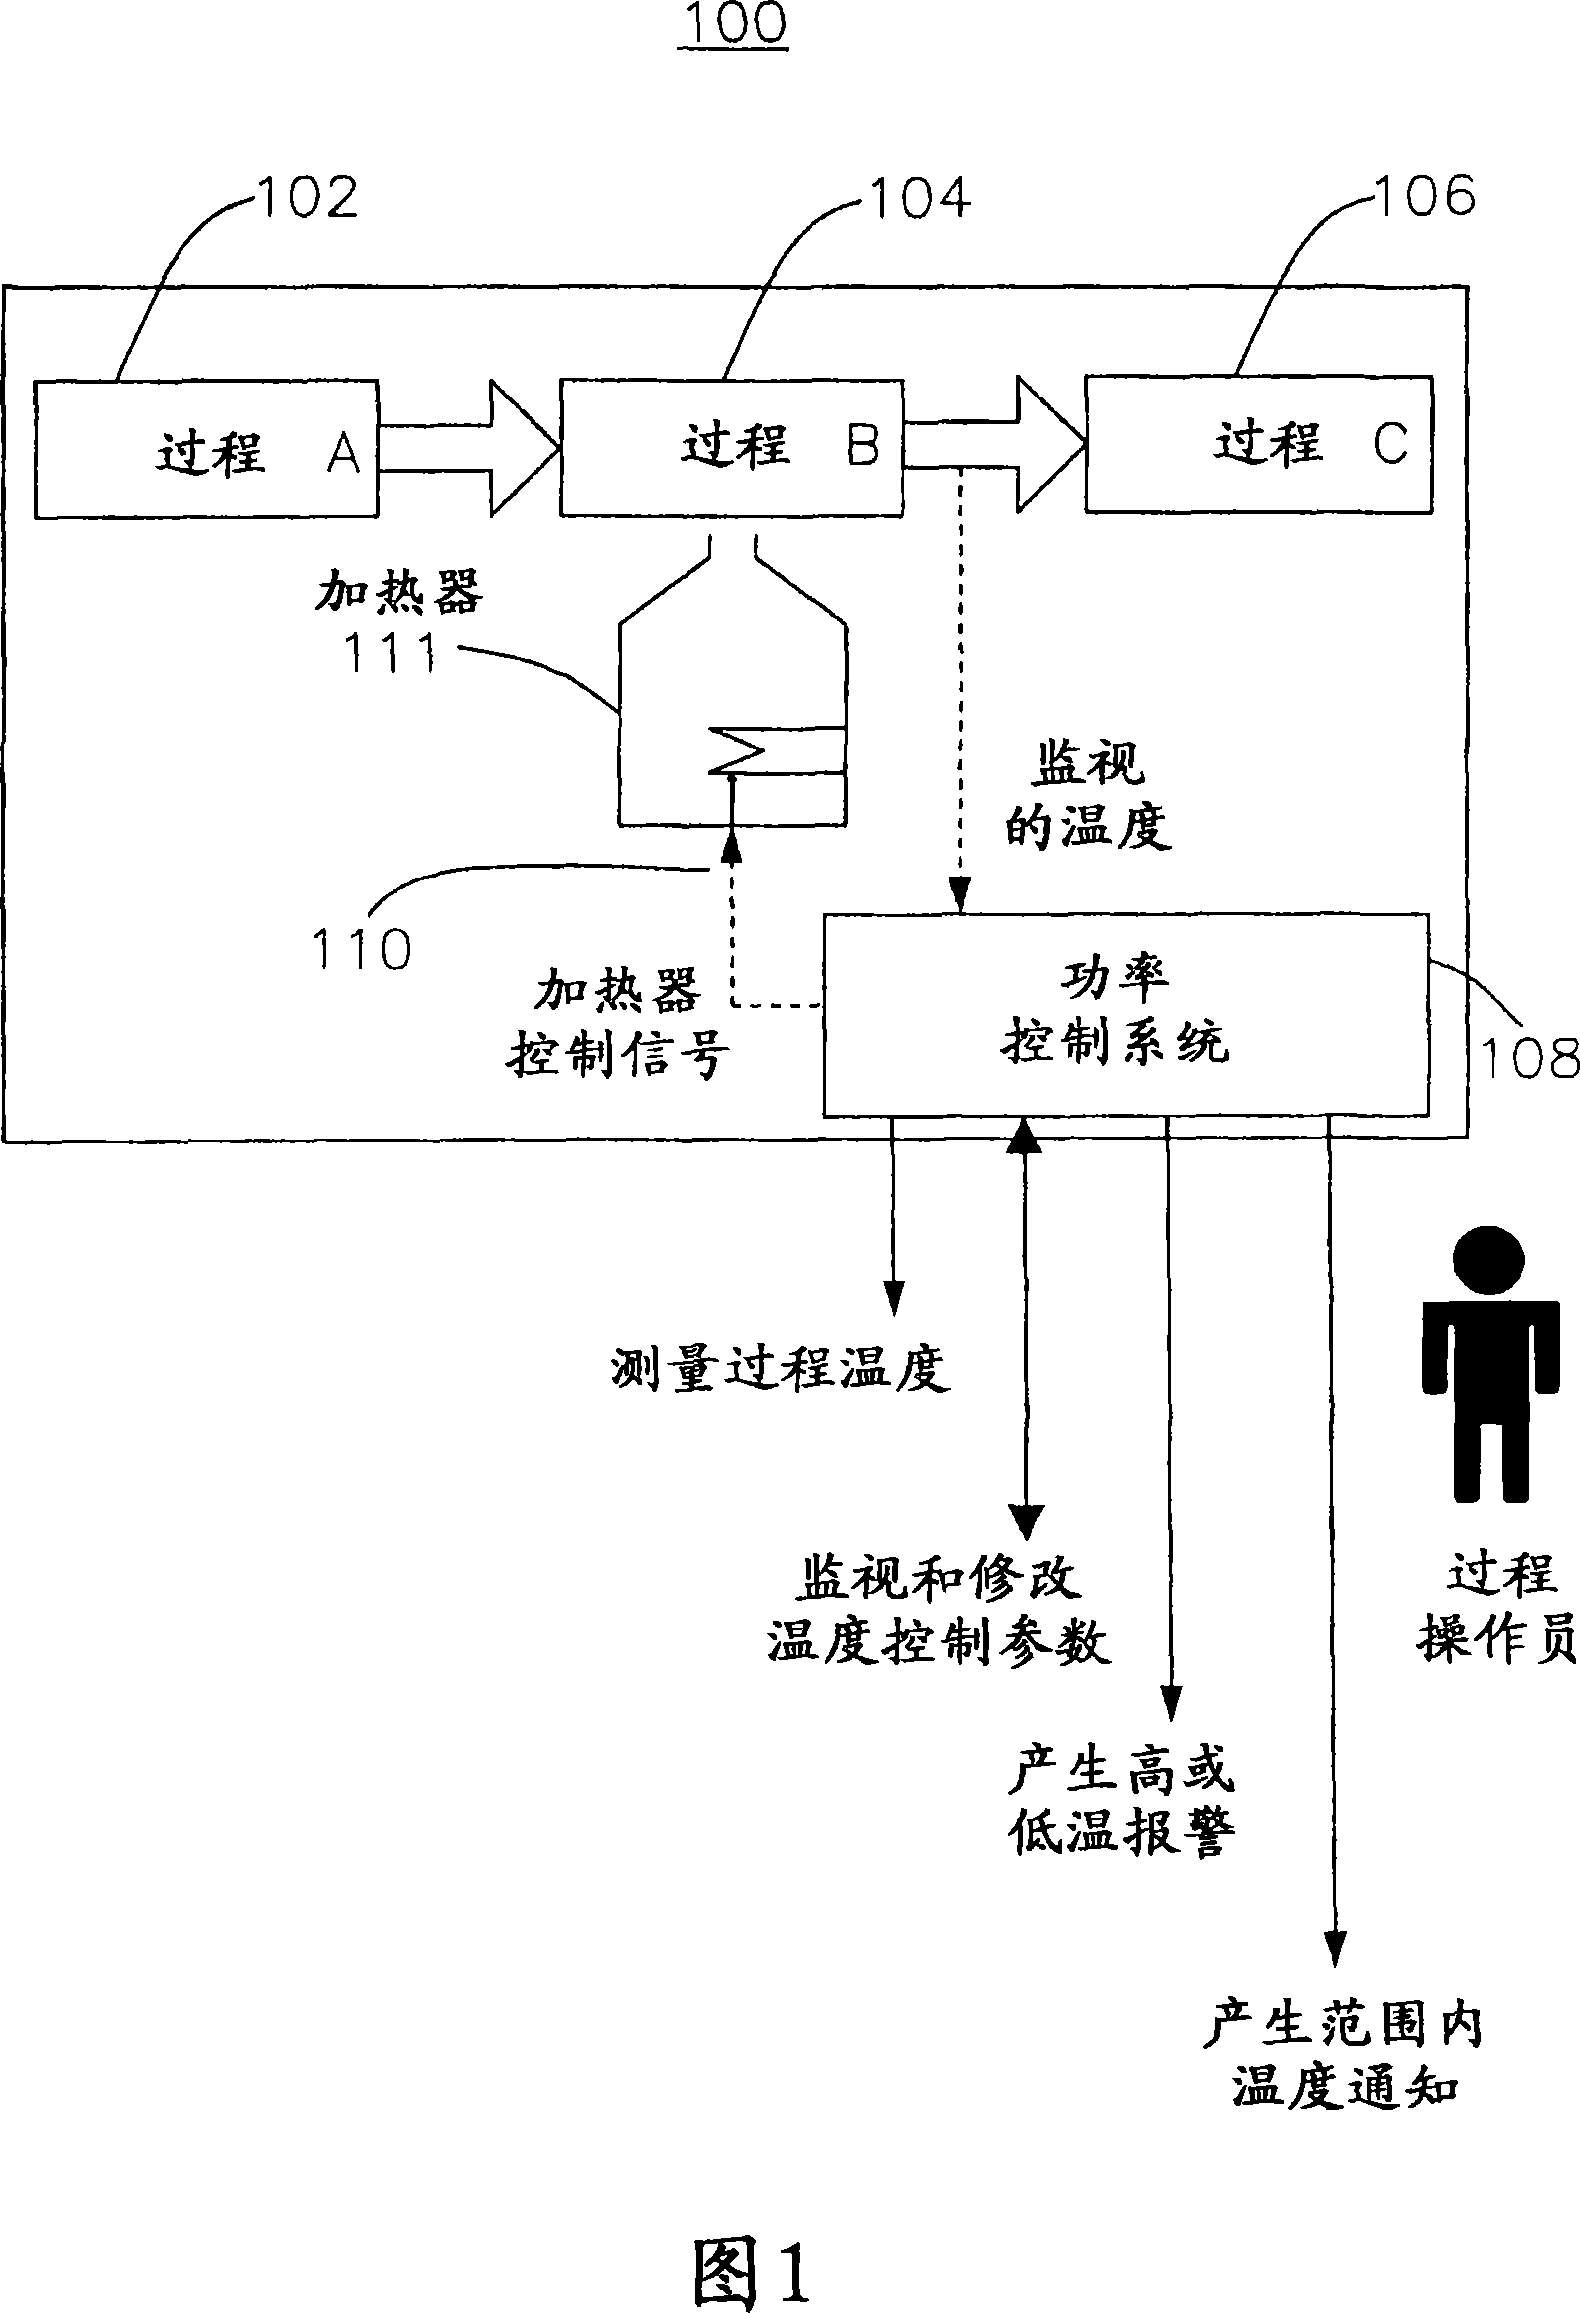 Power controller assembly and method